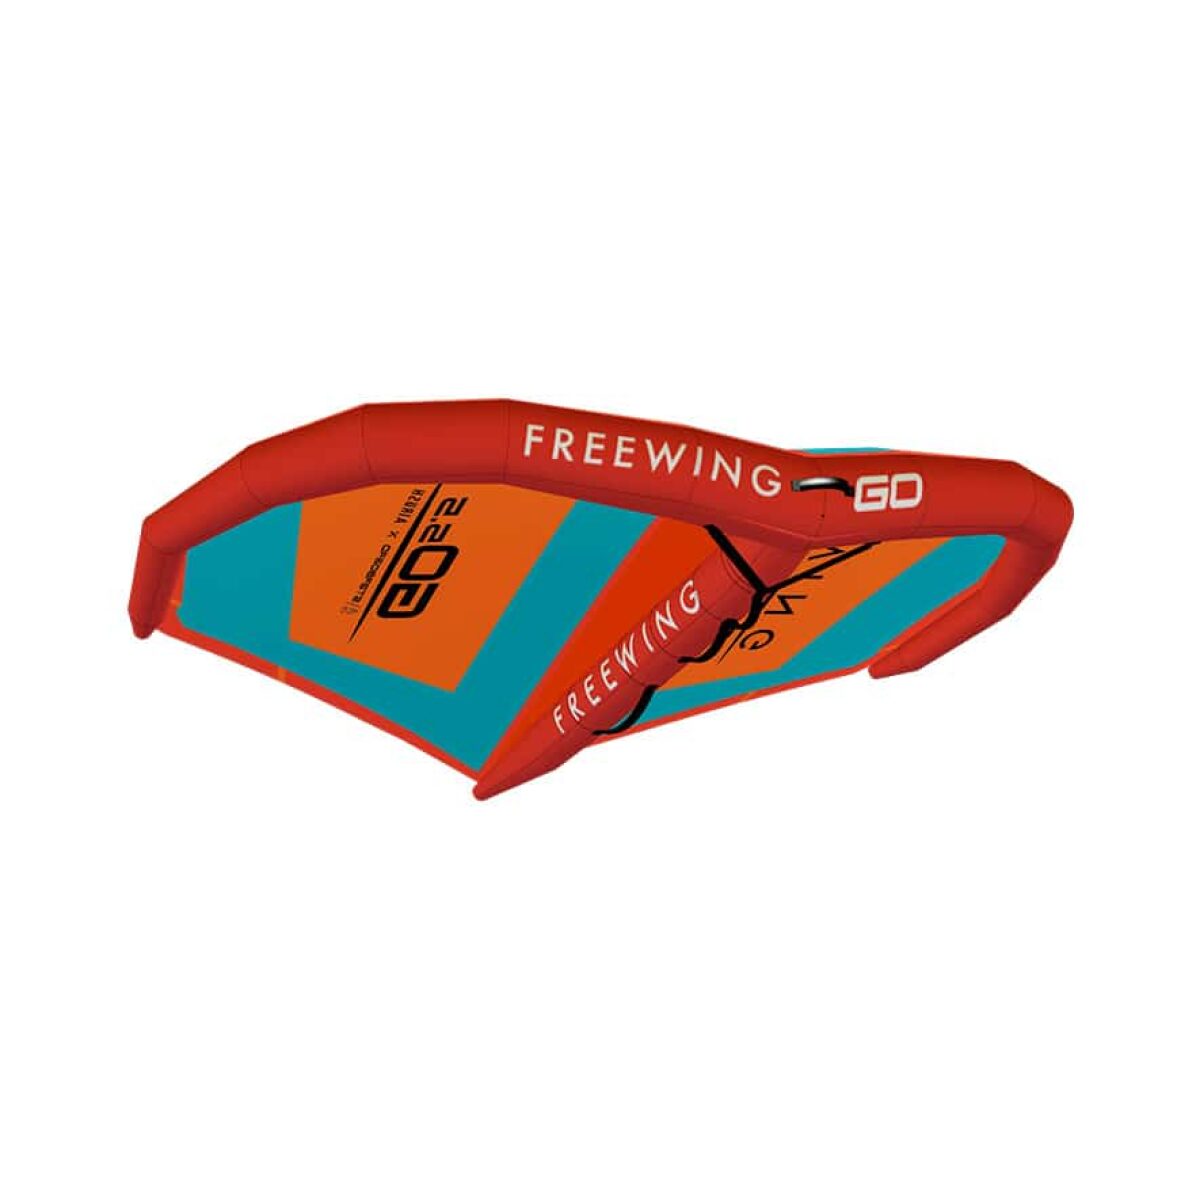 Freewing-Go Foil Wing 2023